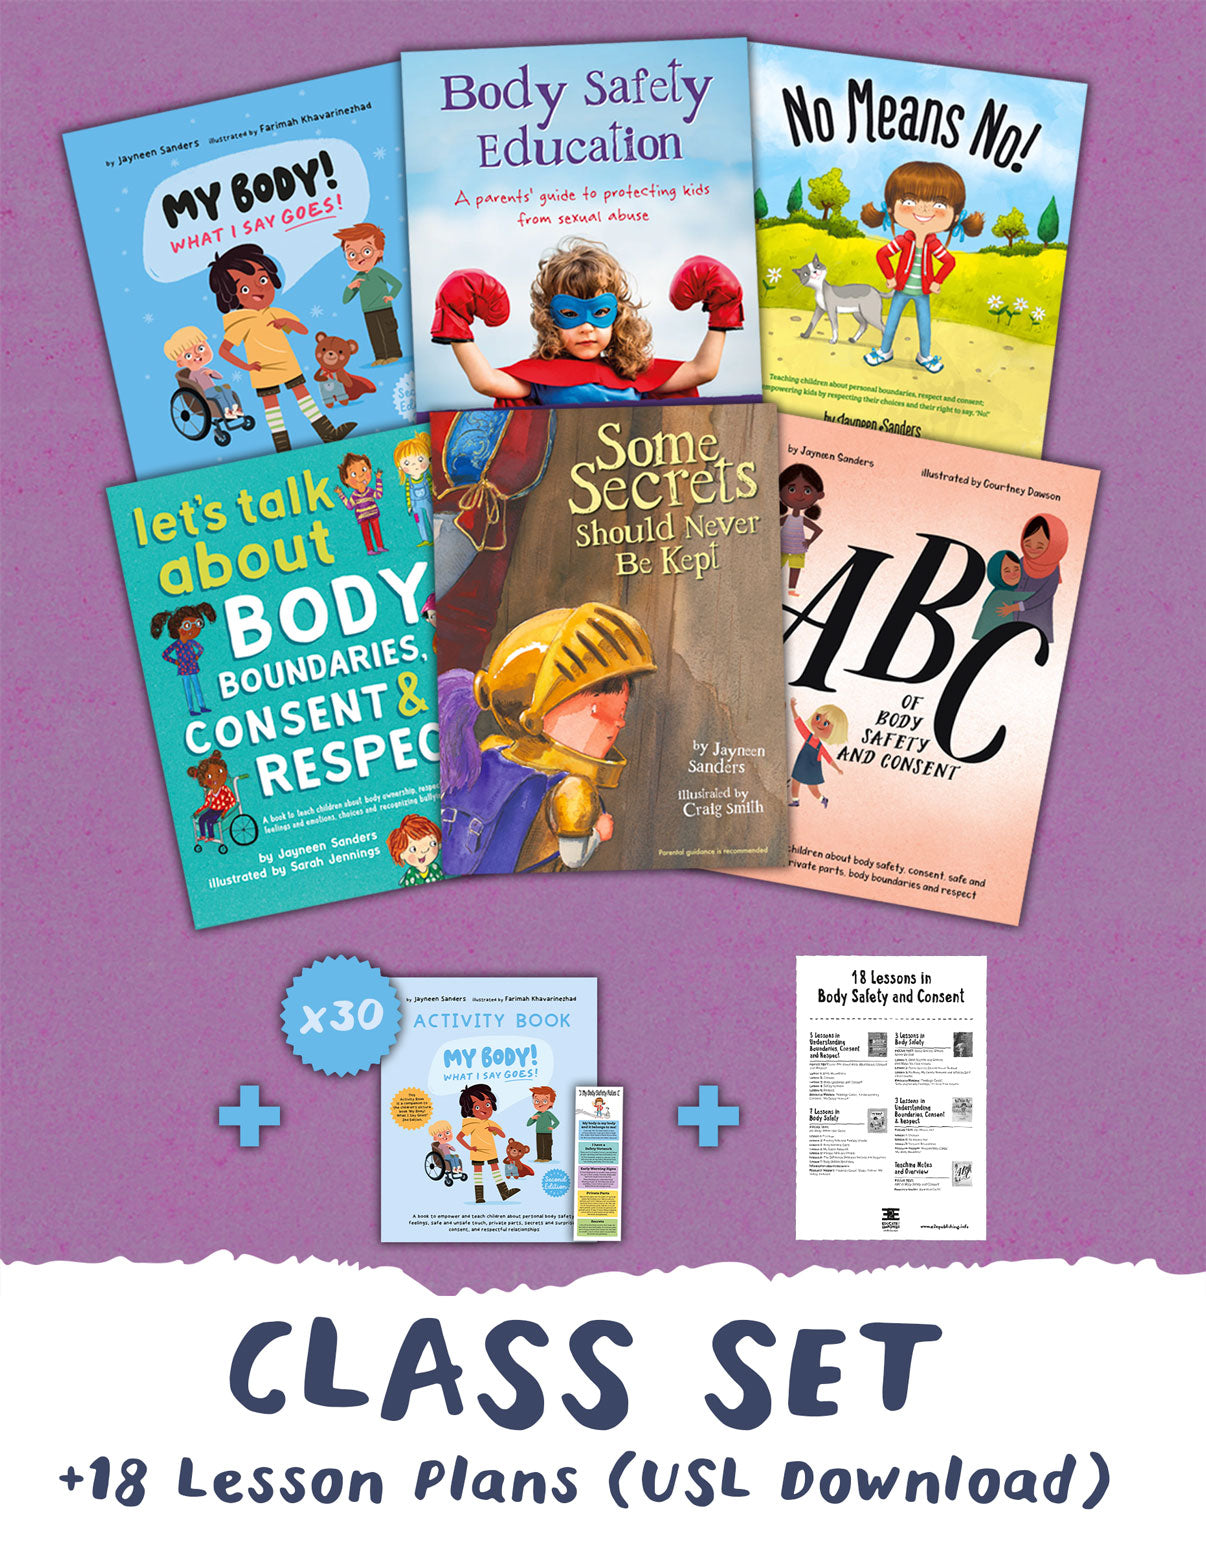 Body Safety for Children - Class Set